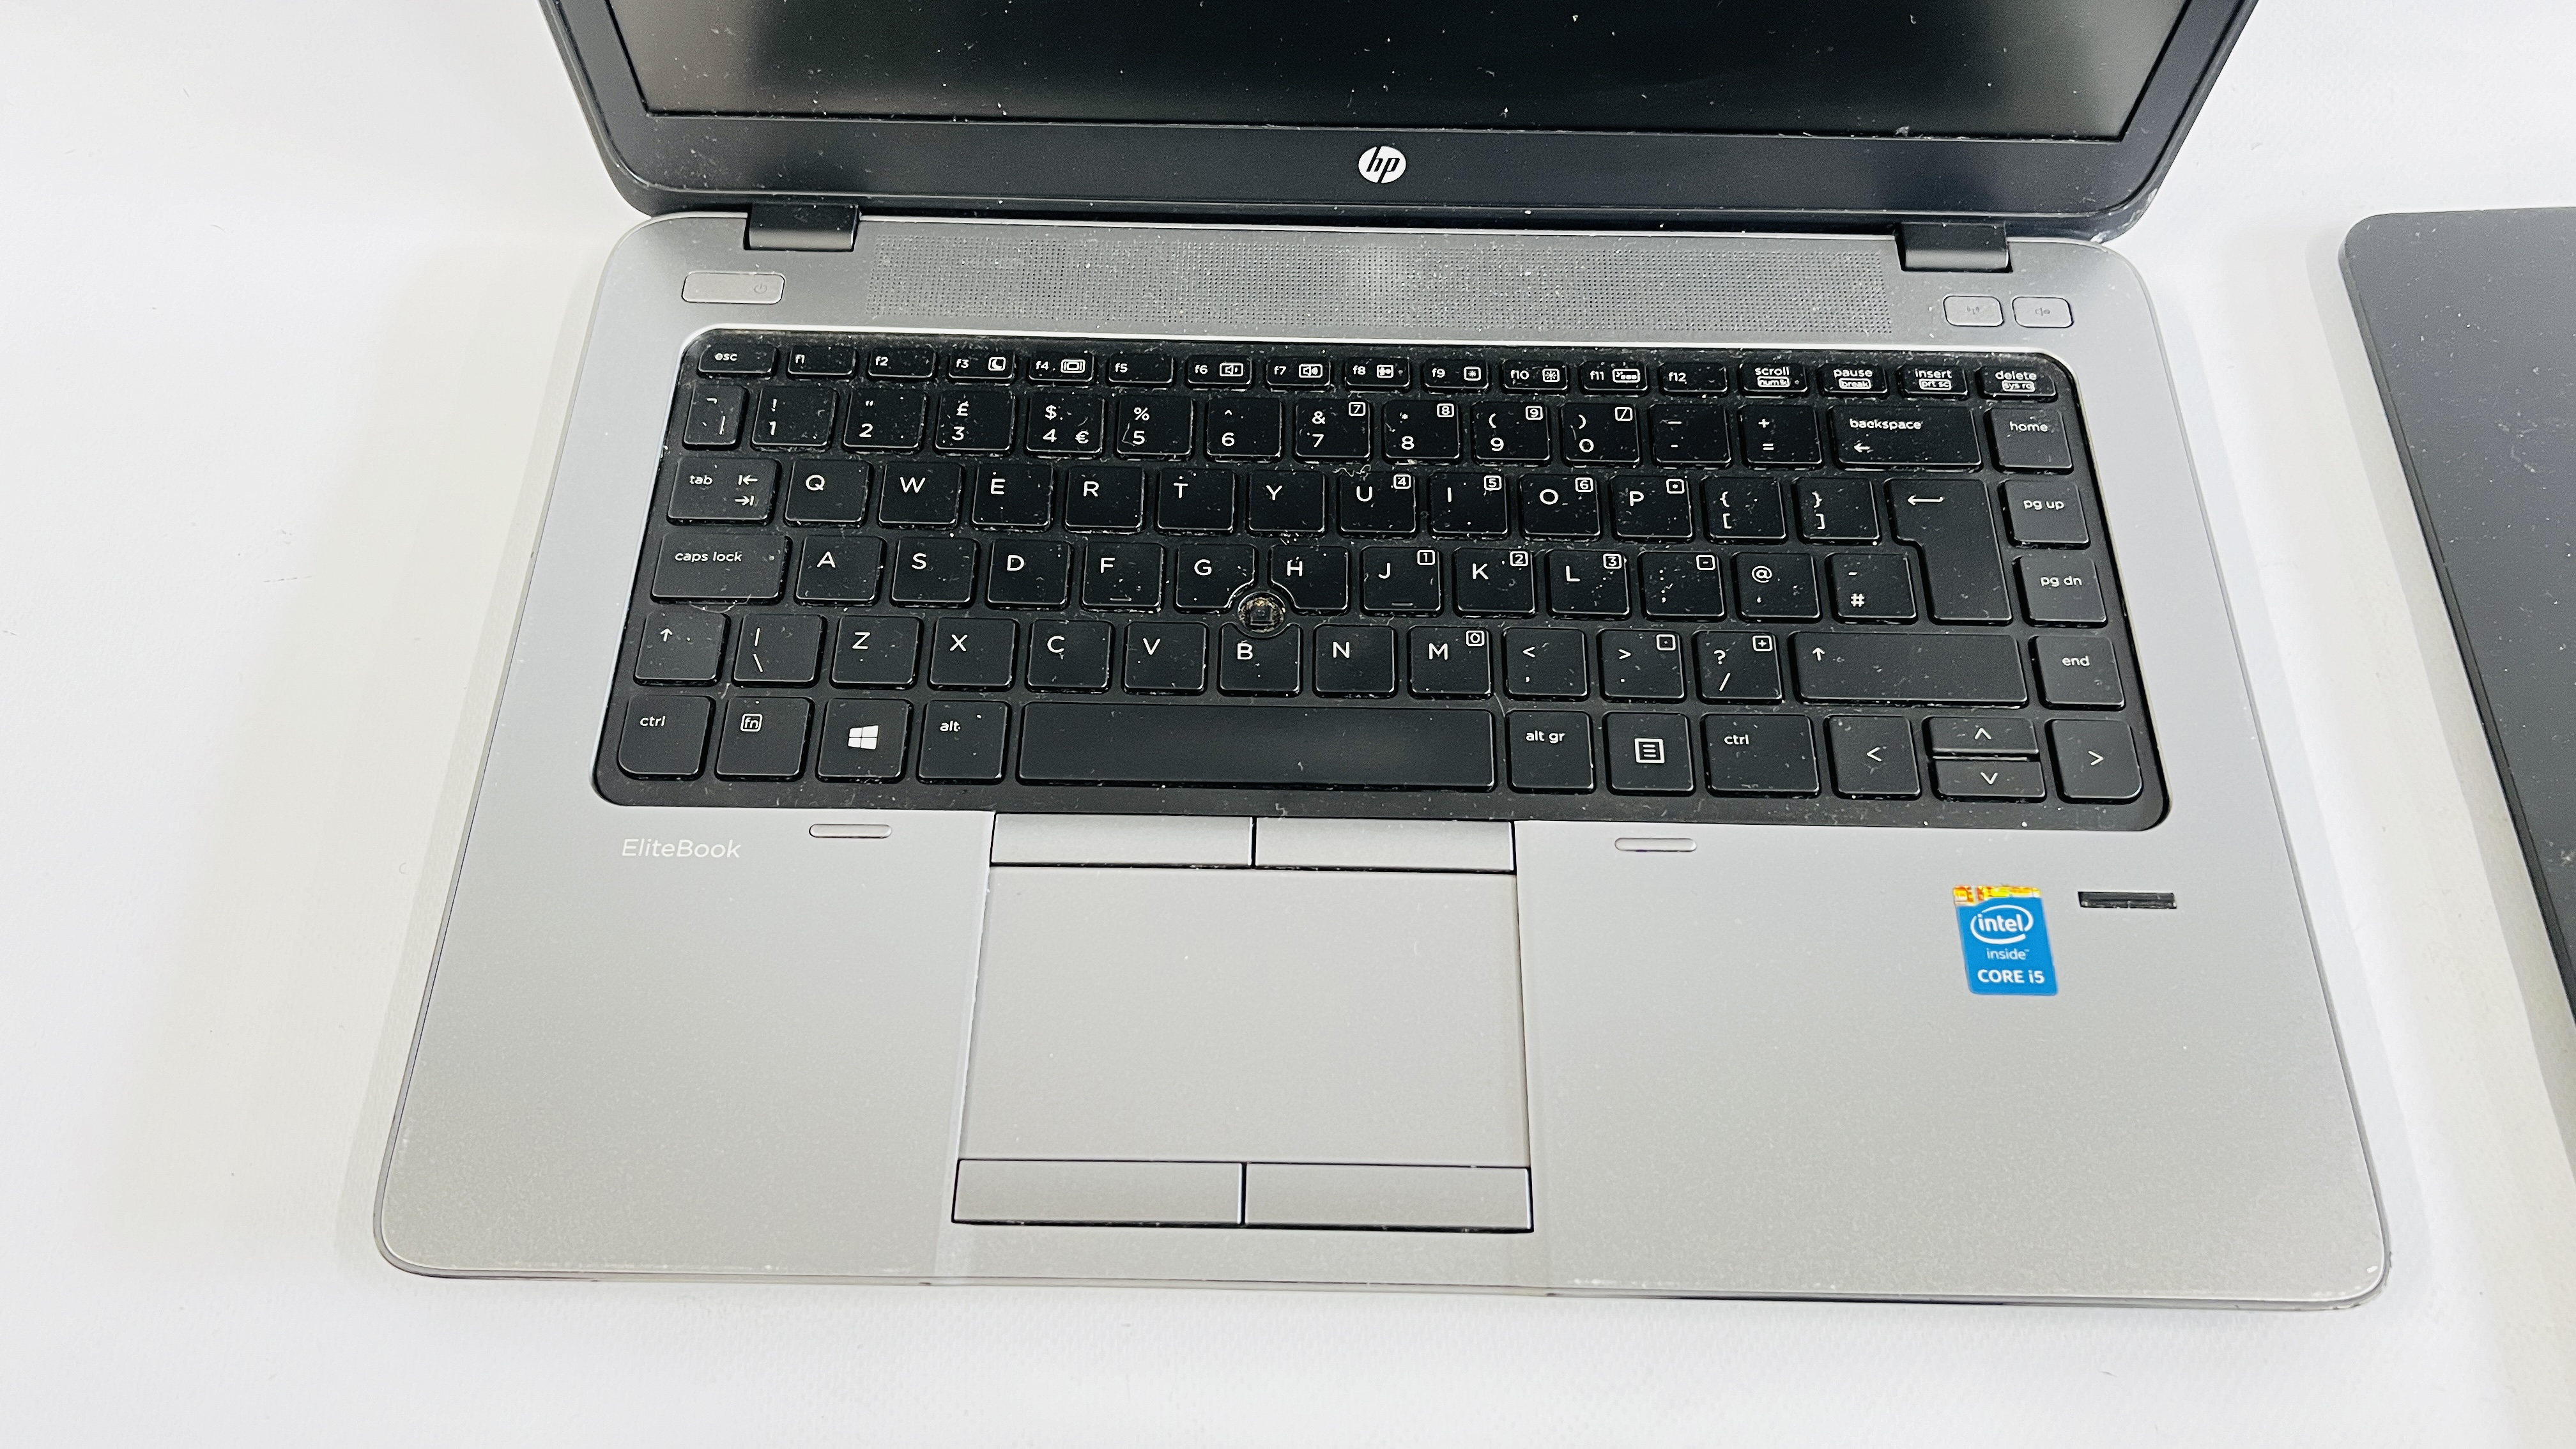 HP ELITEBOOK 840 LAPTOP CORE i5 COMPLETE WITH CHARGER & HP ULTRASLIM DOCKING STATION - NO OPERATING - Image 2 of 6